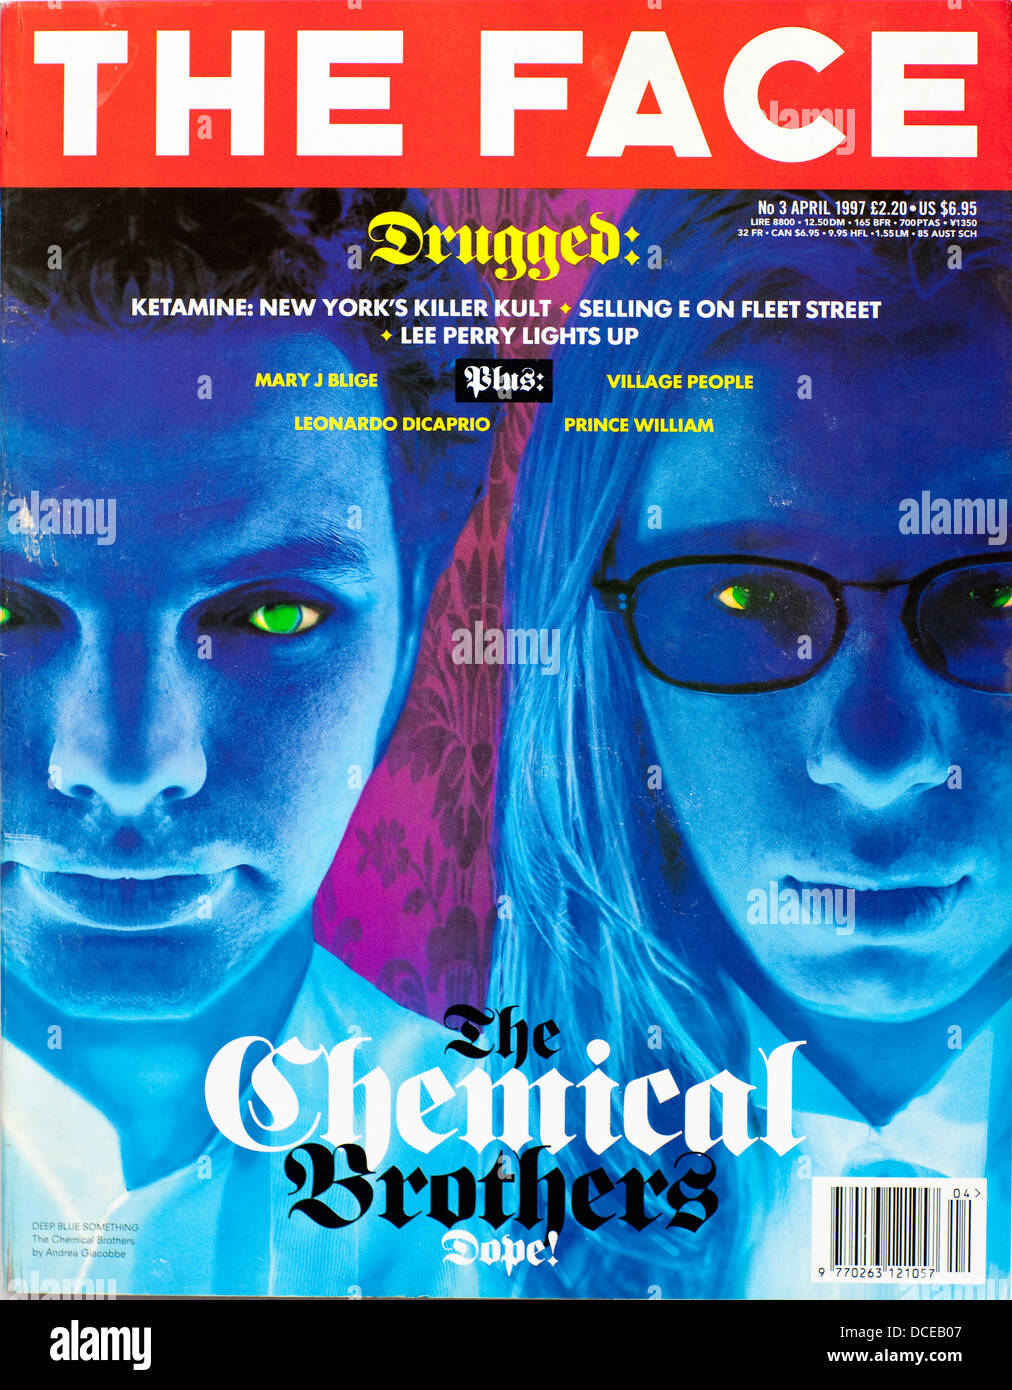 The Face - Volume 3 , Number 3, April 1997 - The Chemical Brothers - Editorial use only Stock Photo